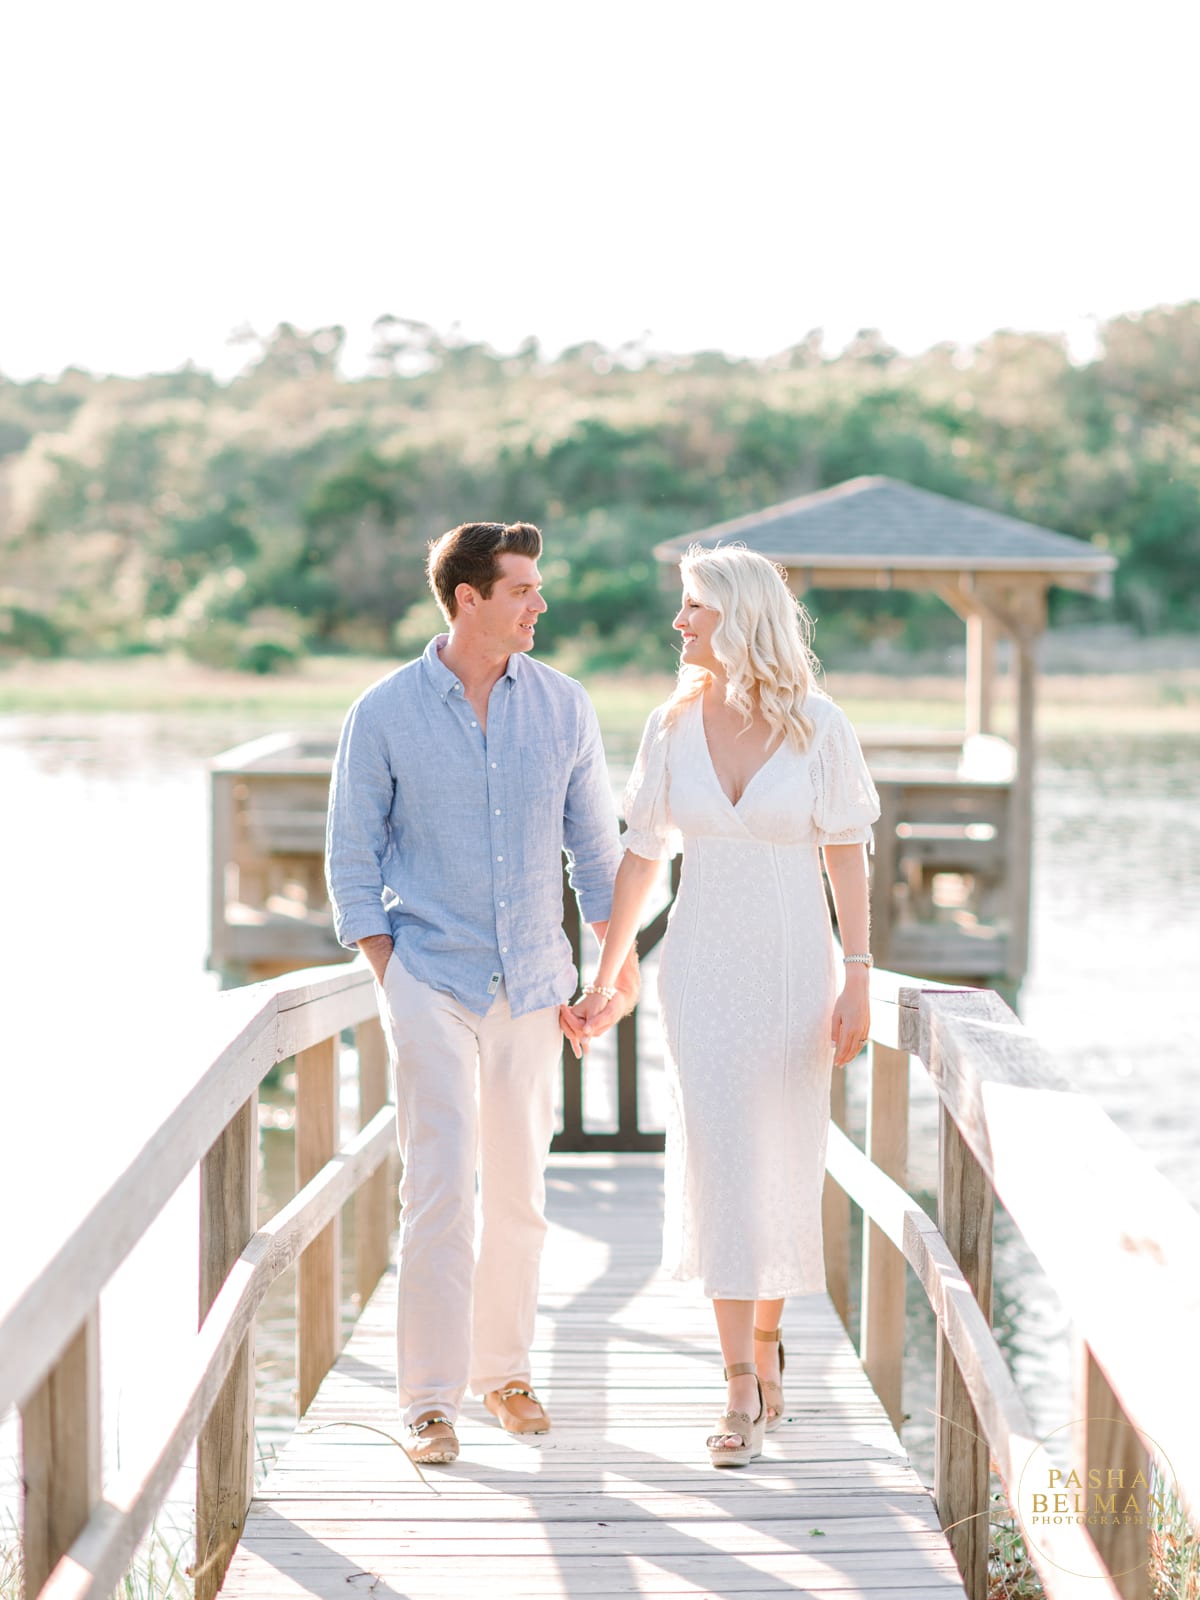 Litchfield Beach Engagement Photography Session